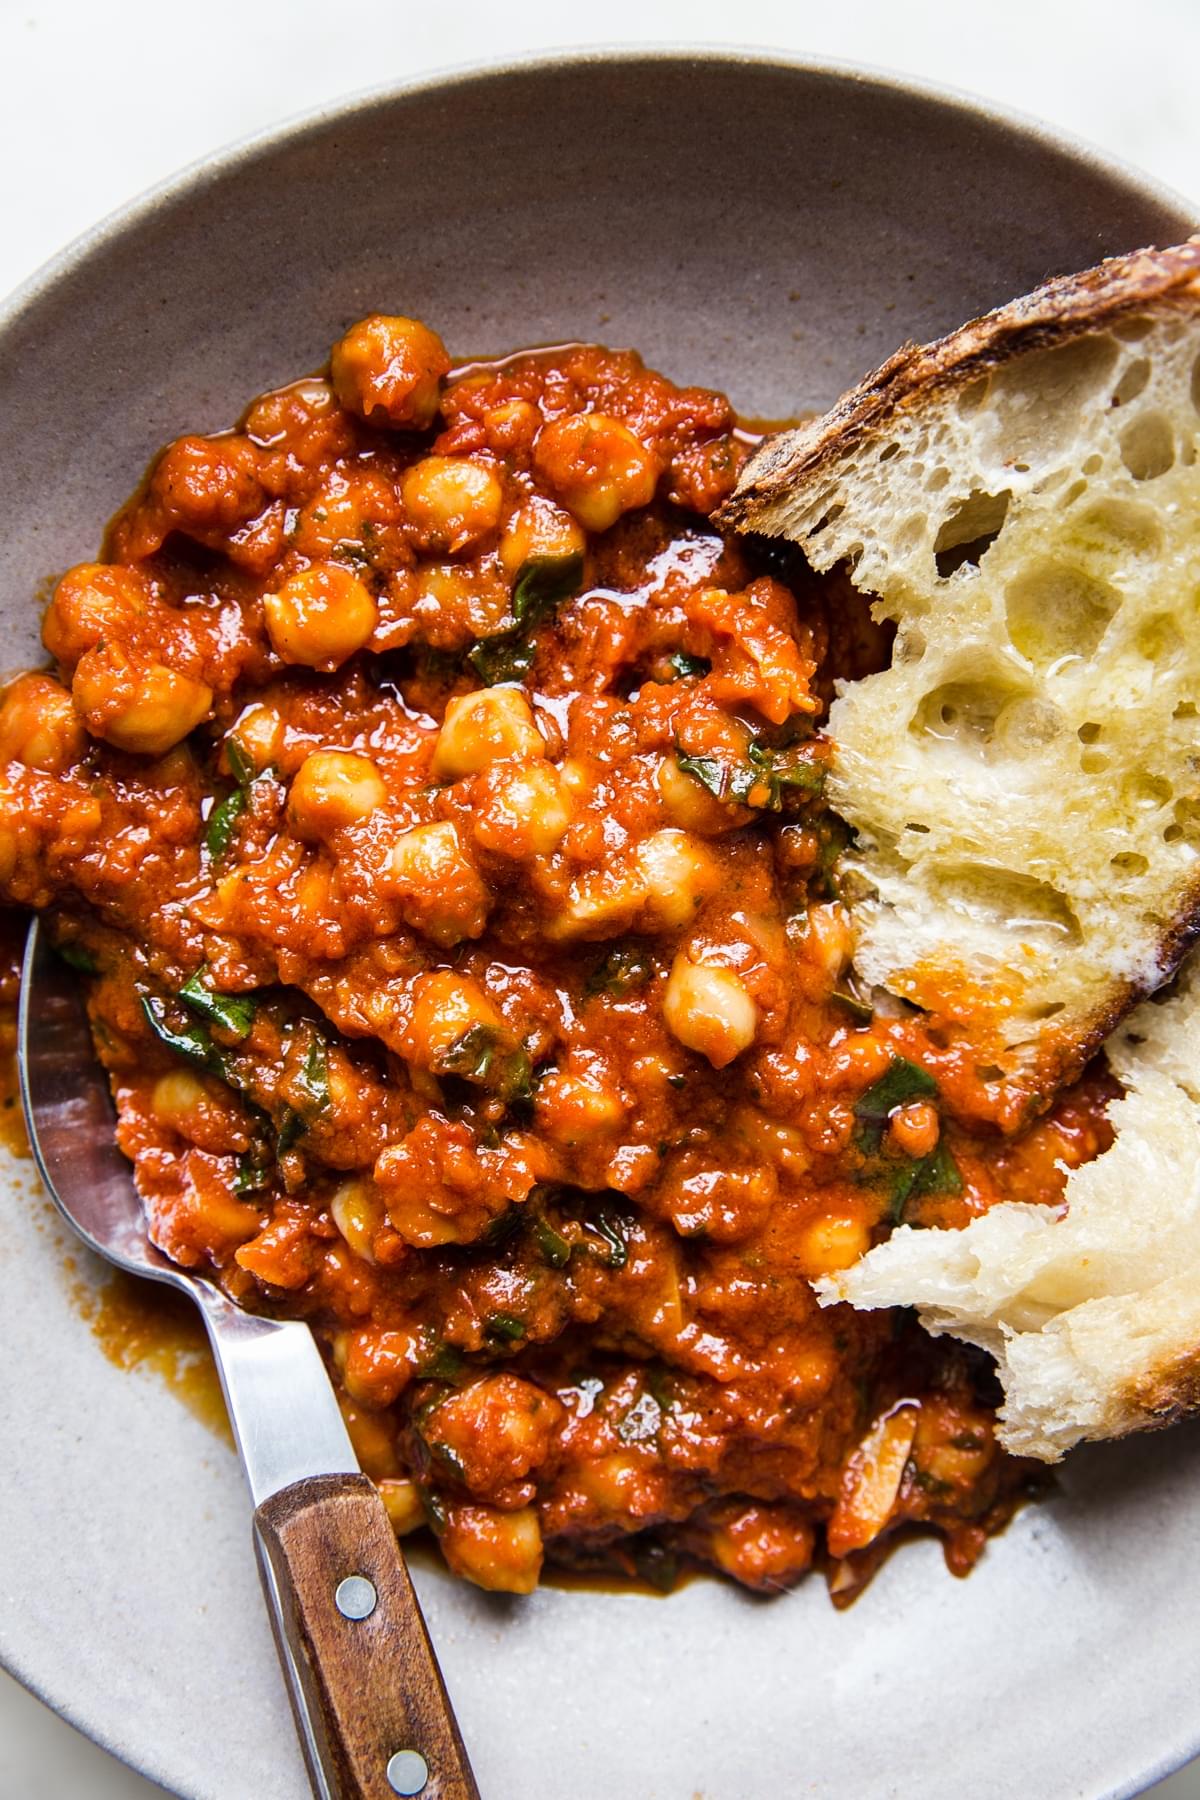 braised chickpeas in tomato sauce with chard shown in a ceramic bowl with sourdough bread and a wooden handled spoon.